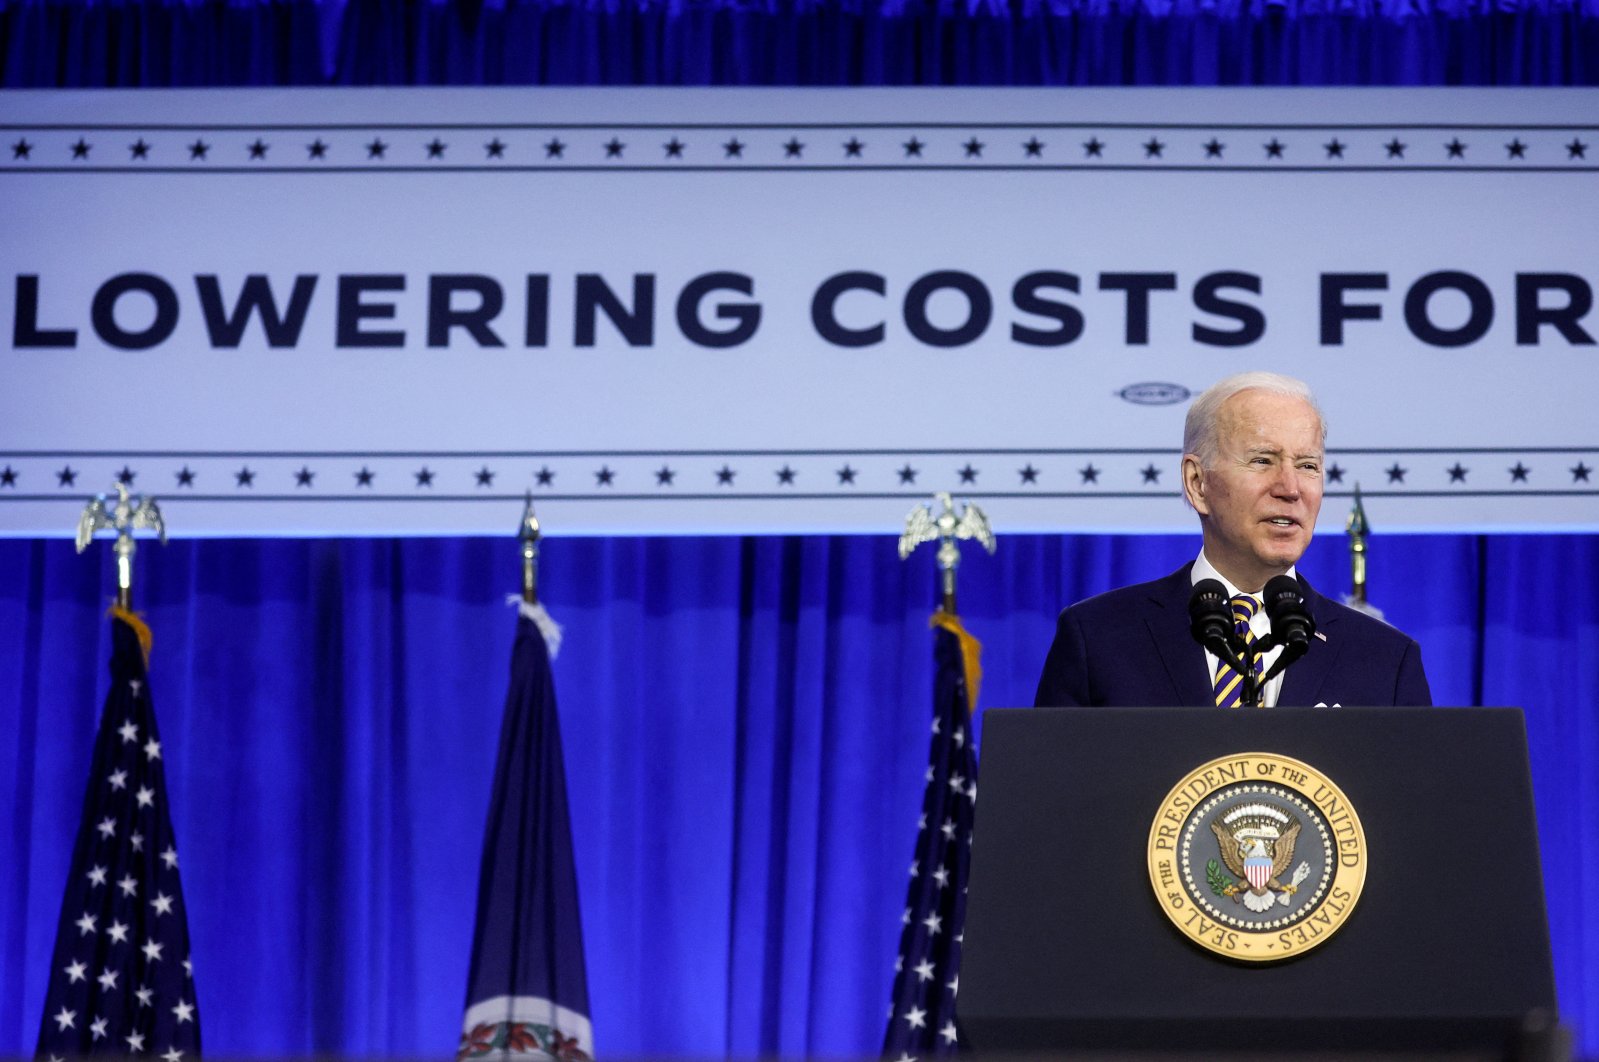 U.S. President Joe Biden delivers remarks on Biden administration efforts to lower health care costs during a visit to Germanna Community College in Culpepper, Virginia, U.S., Feb. 10, 2022. (REUTERS)